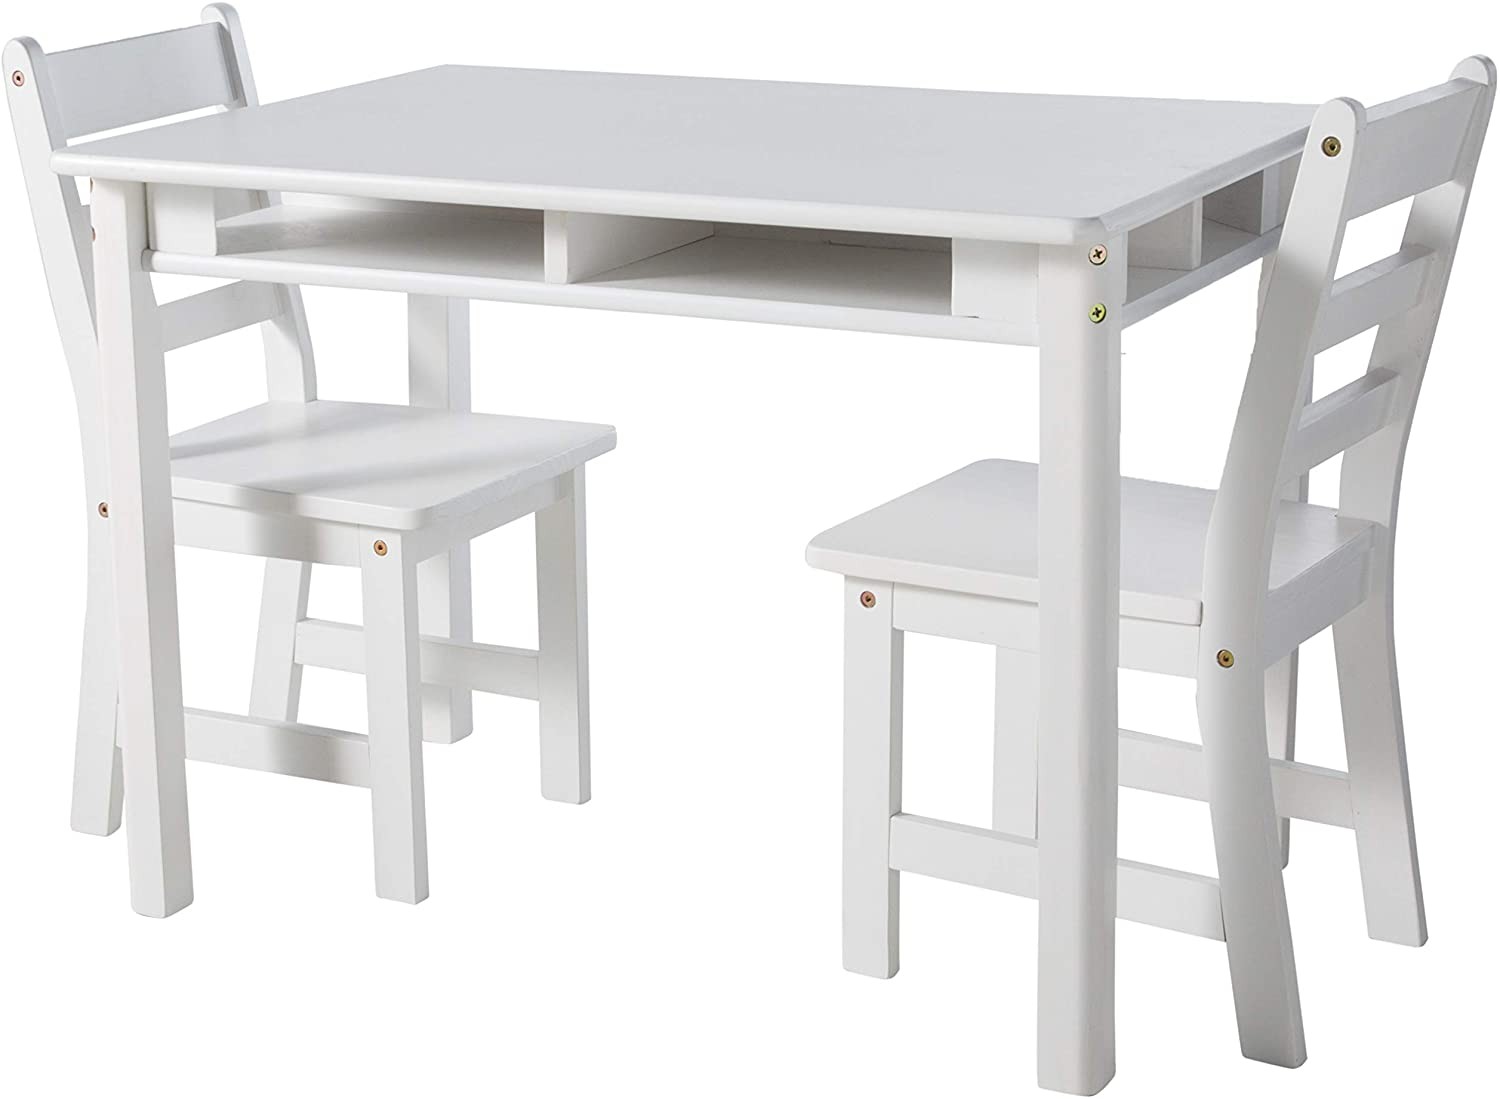 childrens rectangular table and chairs